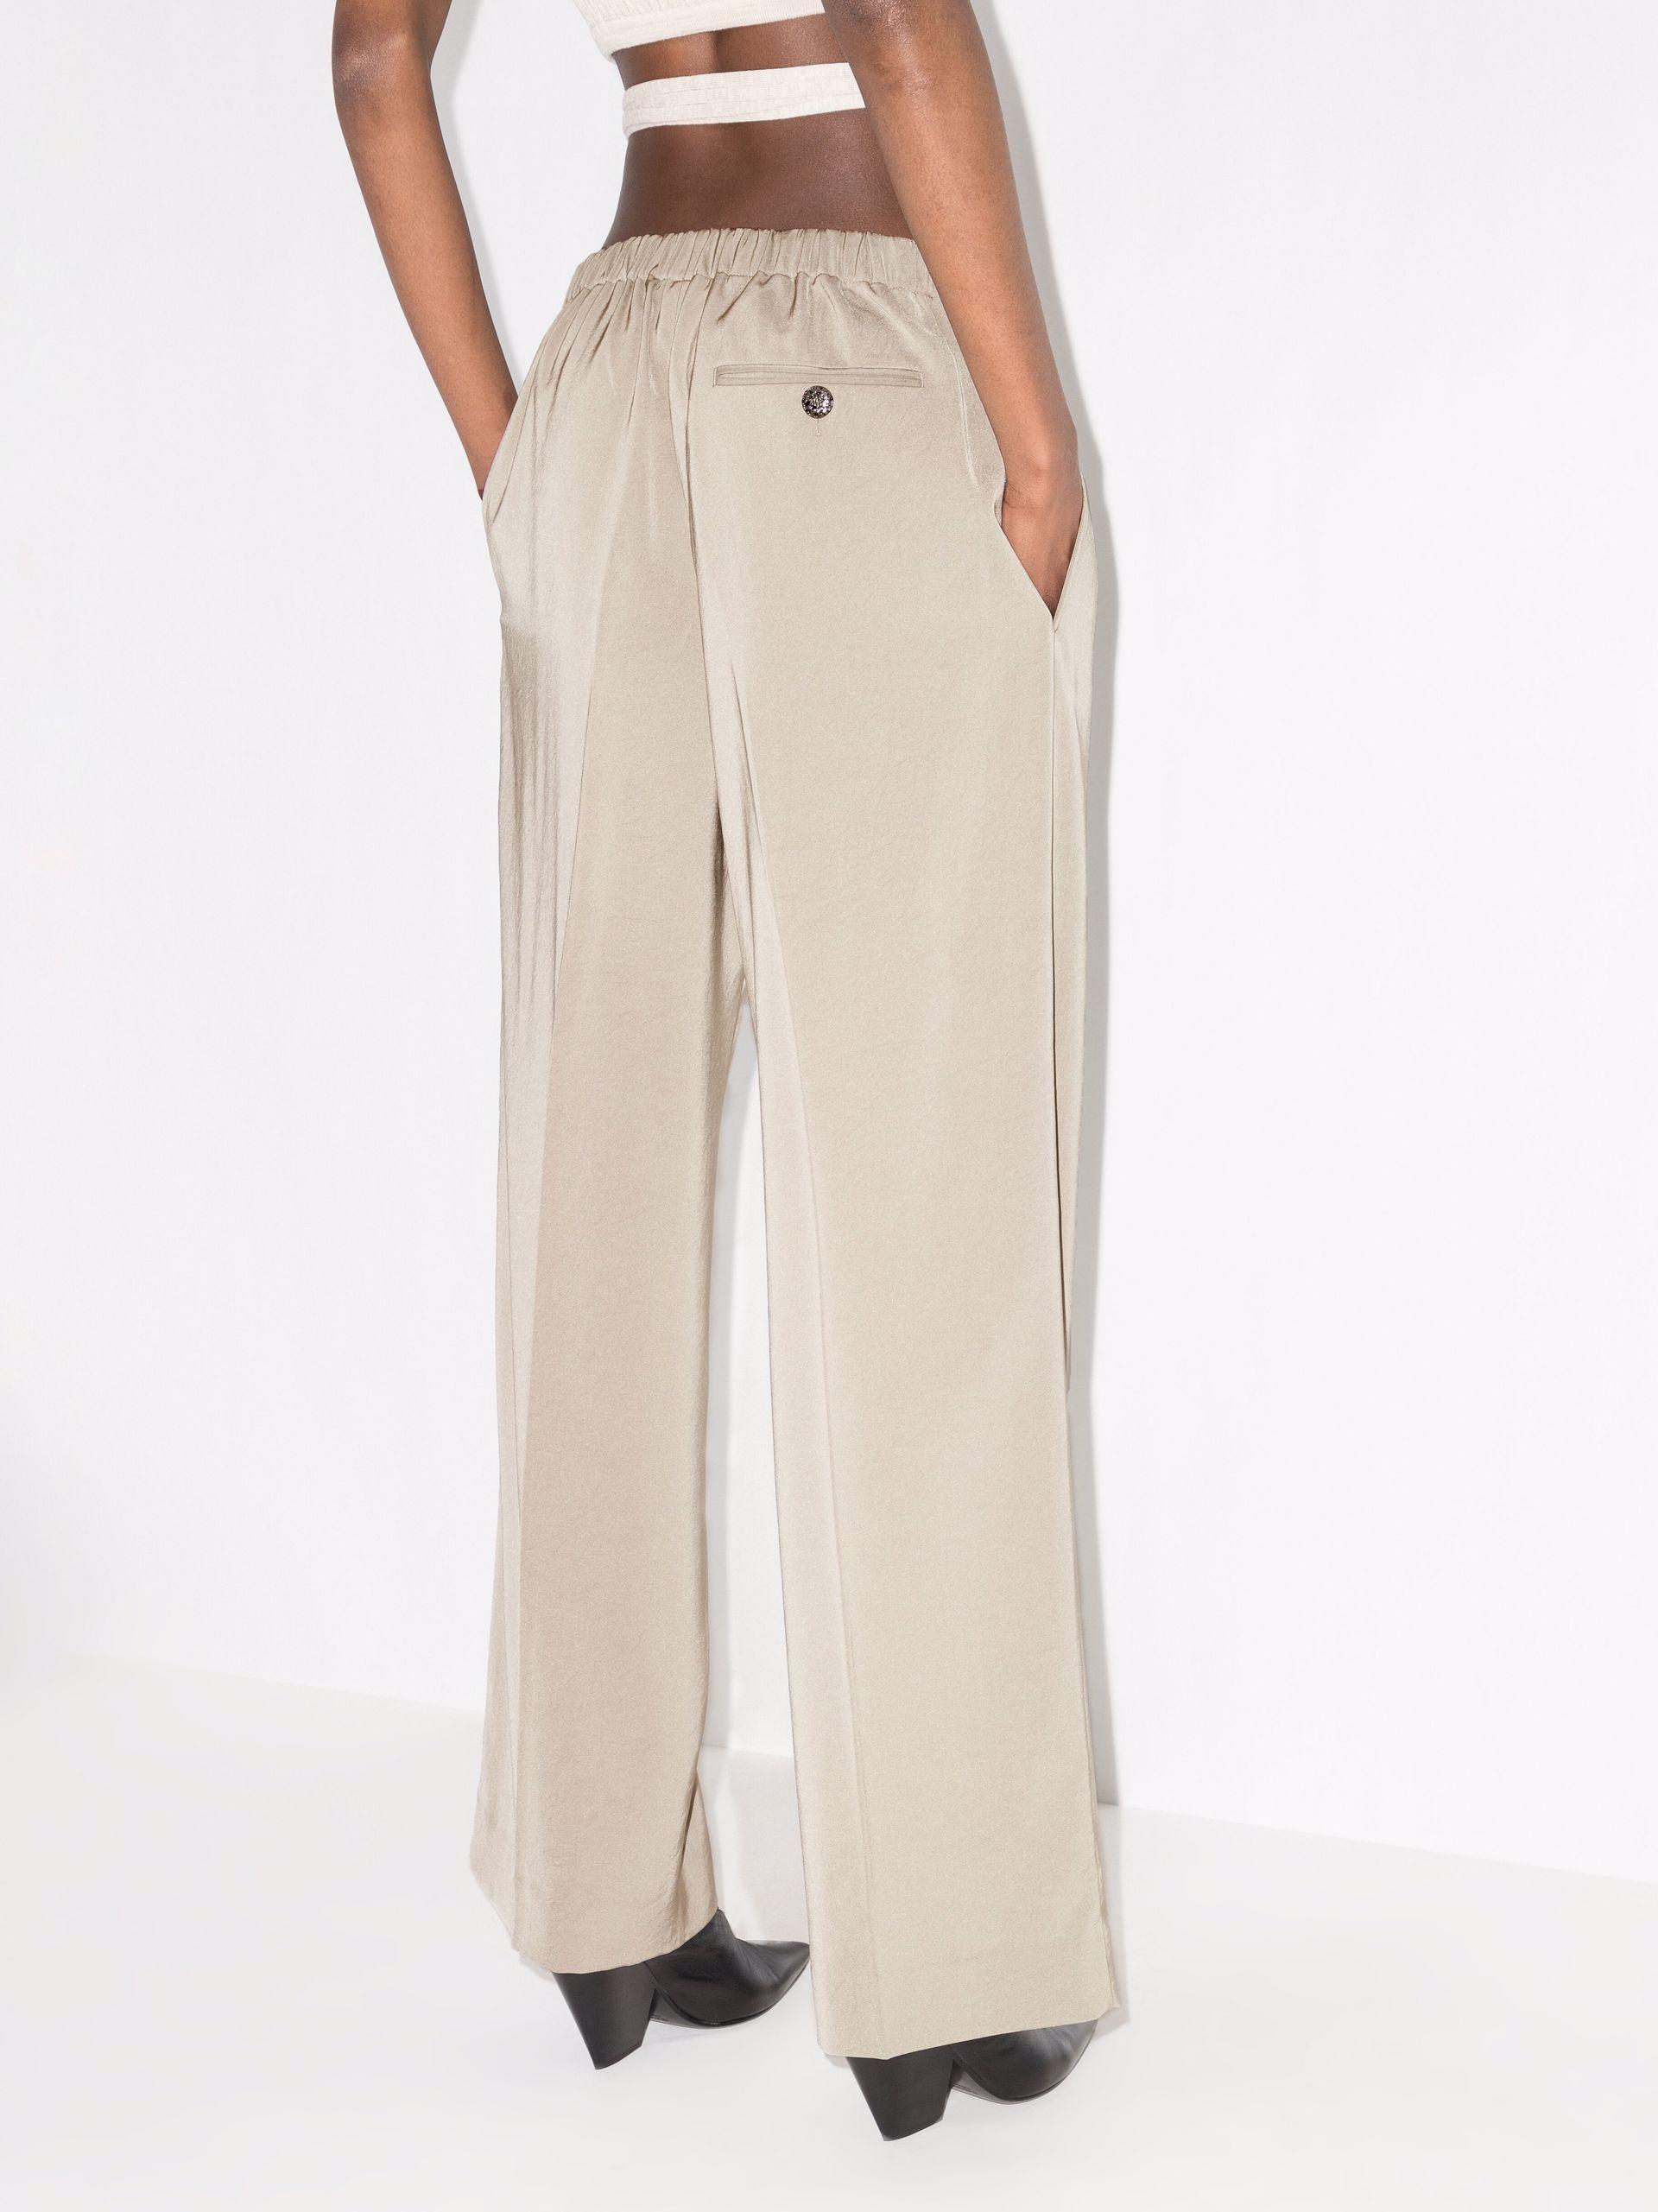 Acne Studios Pernille High Waist Wide Leg Trousers in Natural | Lyst